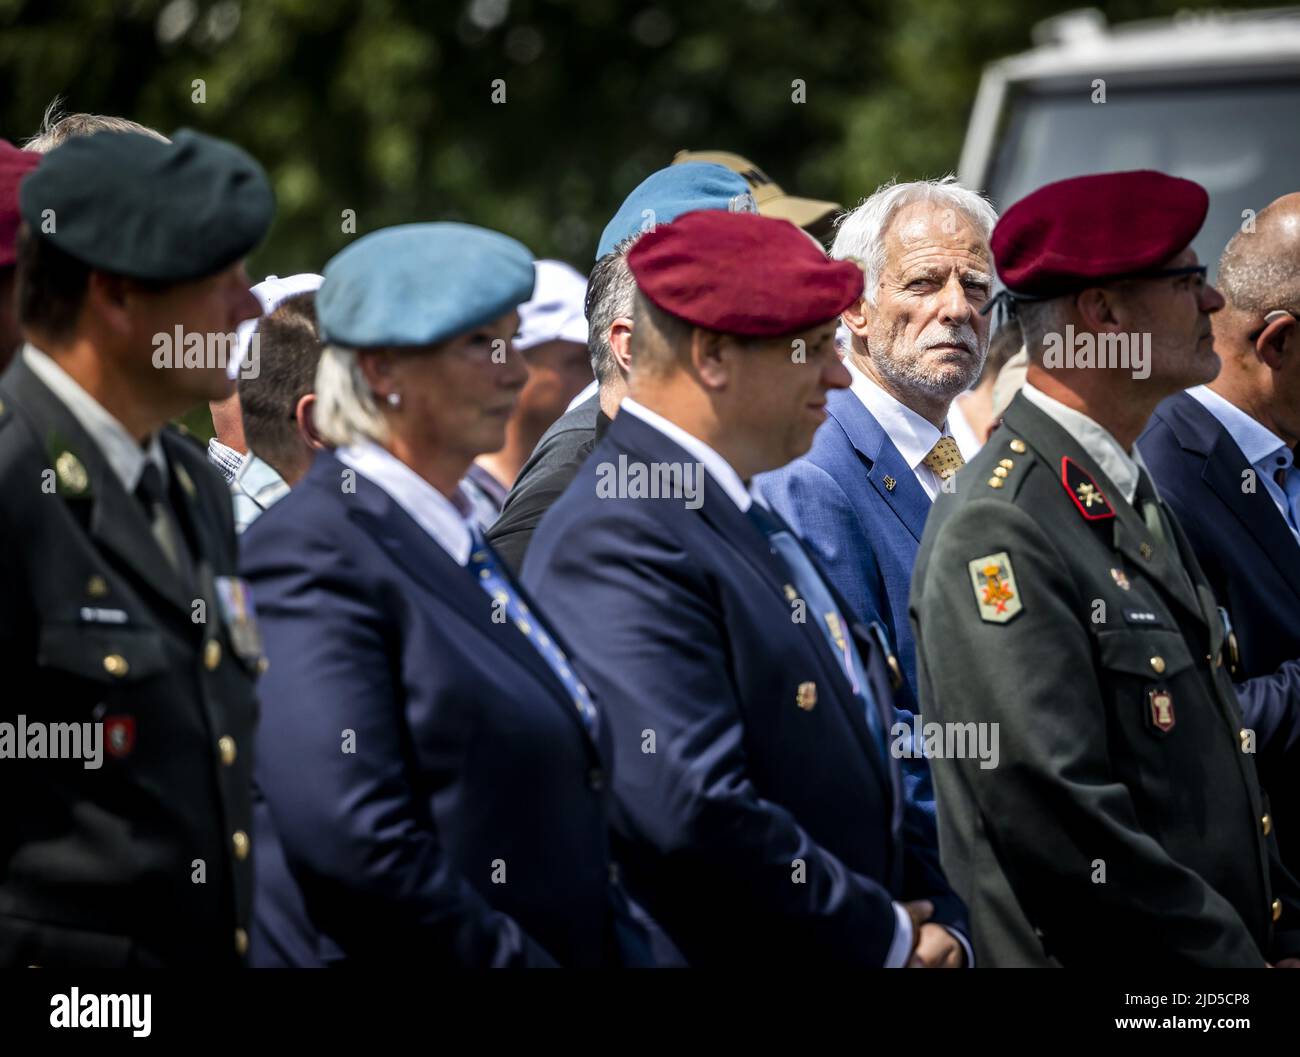 Arnhem, Netherlands. 18th June, 2022. 2022-06-18 14:06:13 ARNHEM - Thom Karremans, former commander of the Dutch UN peacekeepers in Bosnia, during a meeting of veterans of Dutchbat III in the Oranjekazerne in Schaarsbergen. The soldiers who had to guard the Bosnian enclave of Srebrenica in 1995 are being restored by the cabinet. ANP REMKO DE WAAL netherlands out - belgium out Credit: ANP/Alamy Live News Stock Photo